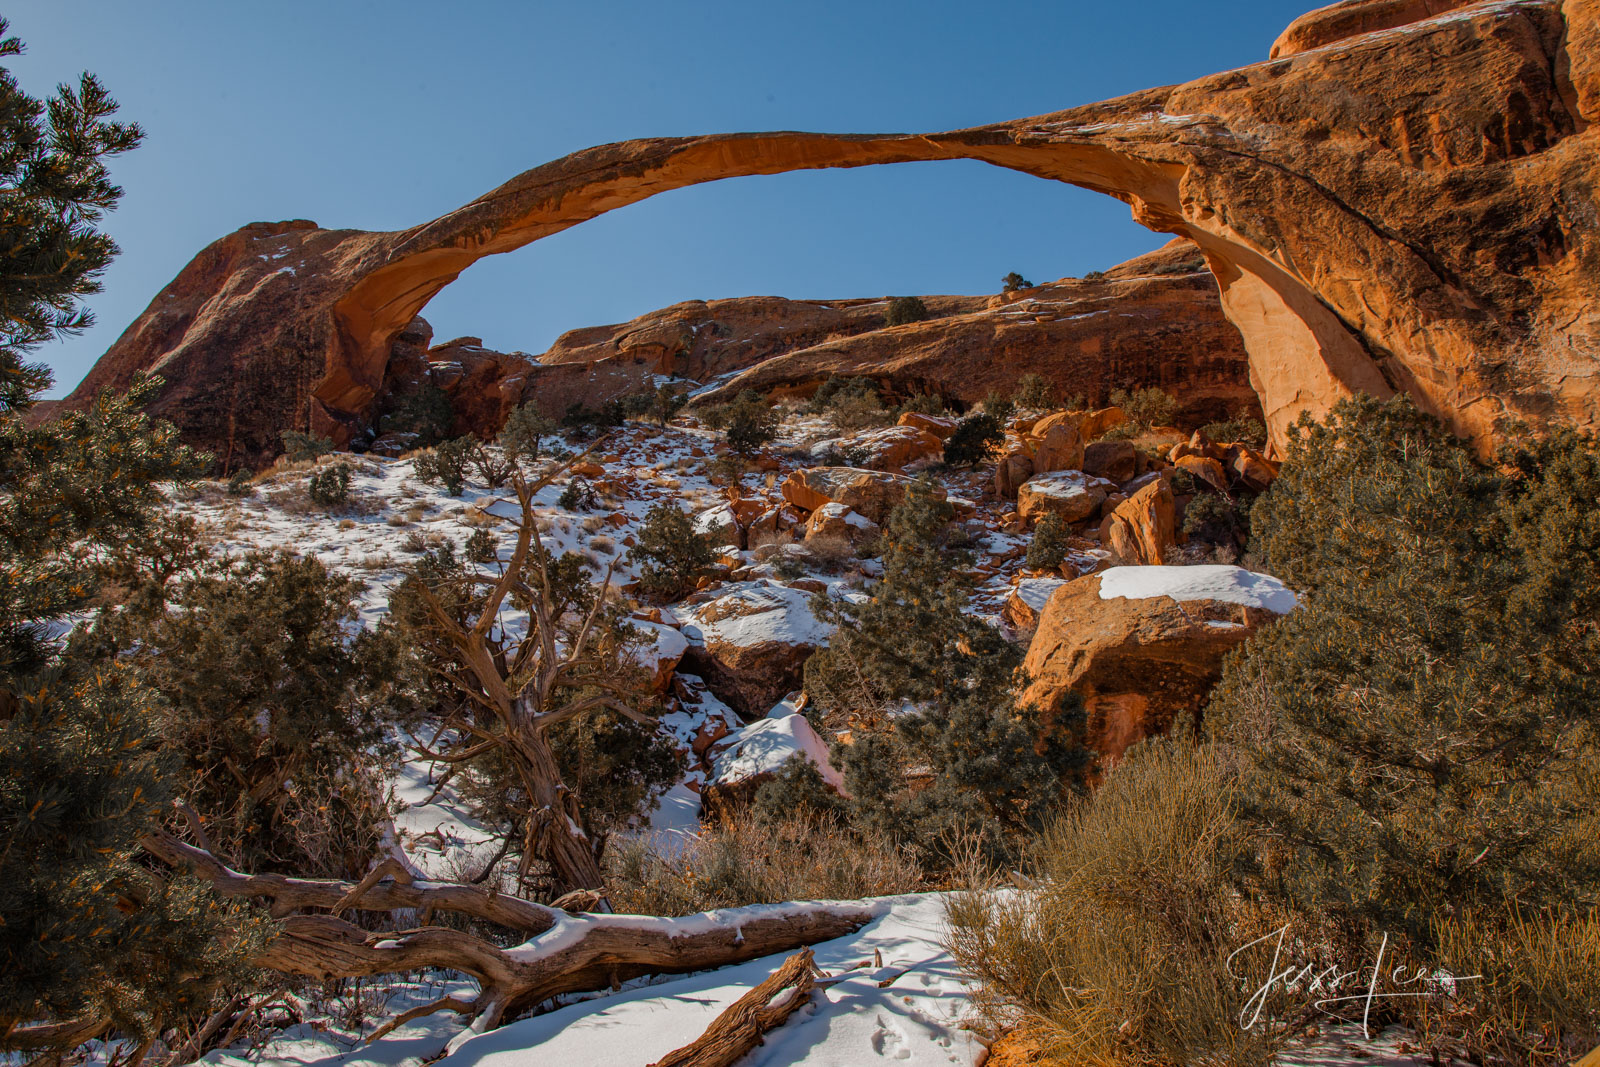 FINE ART LIMITED PHOTO PRINT OF LANDSCAPE ARCH in ARCHES NATIONAL PARK Arches Landscape photo print of Utah Landscape.This is...